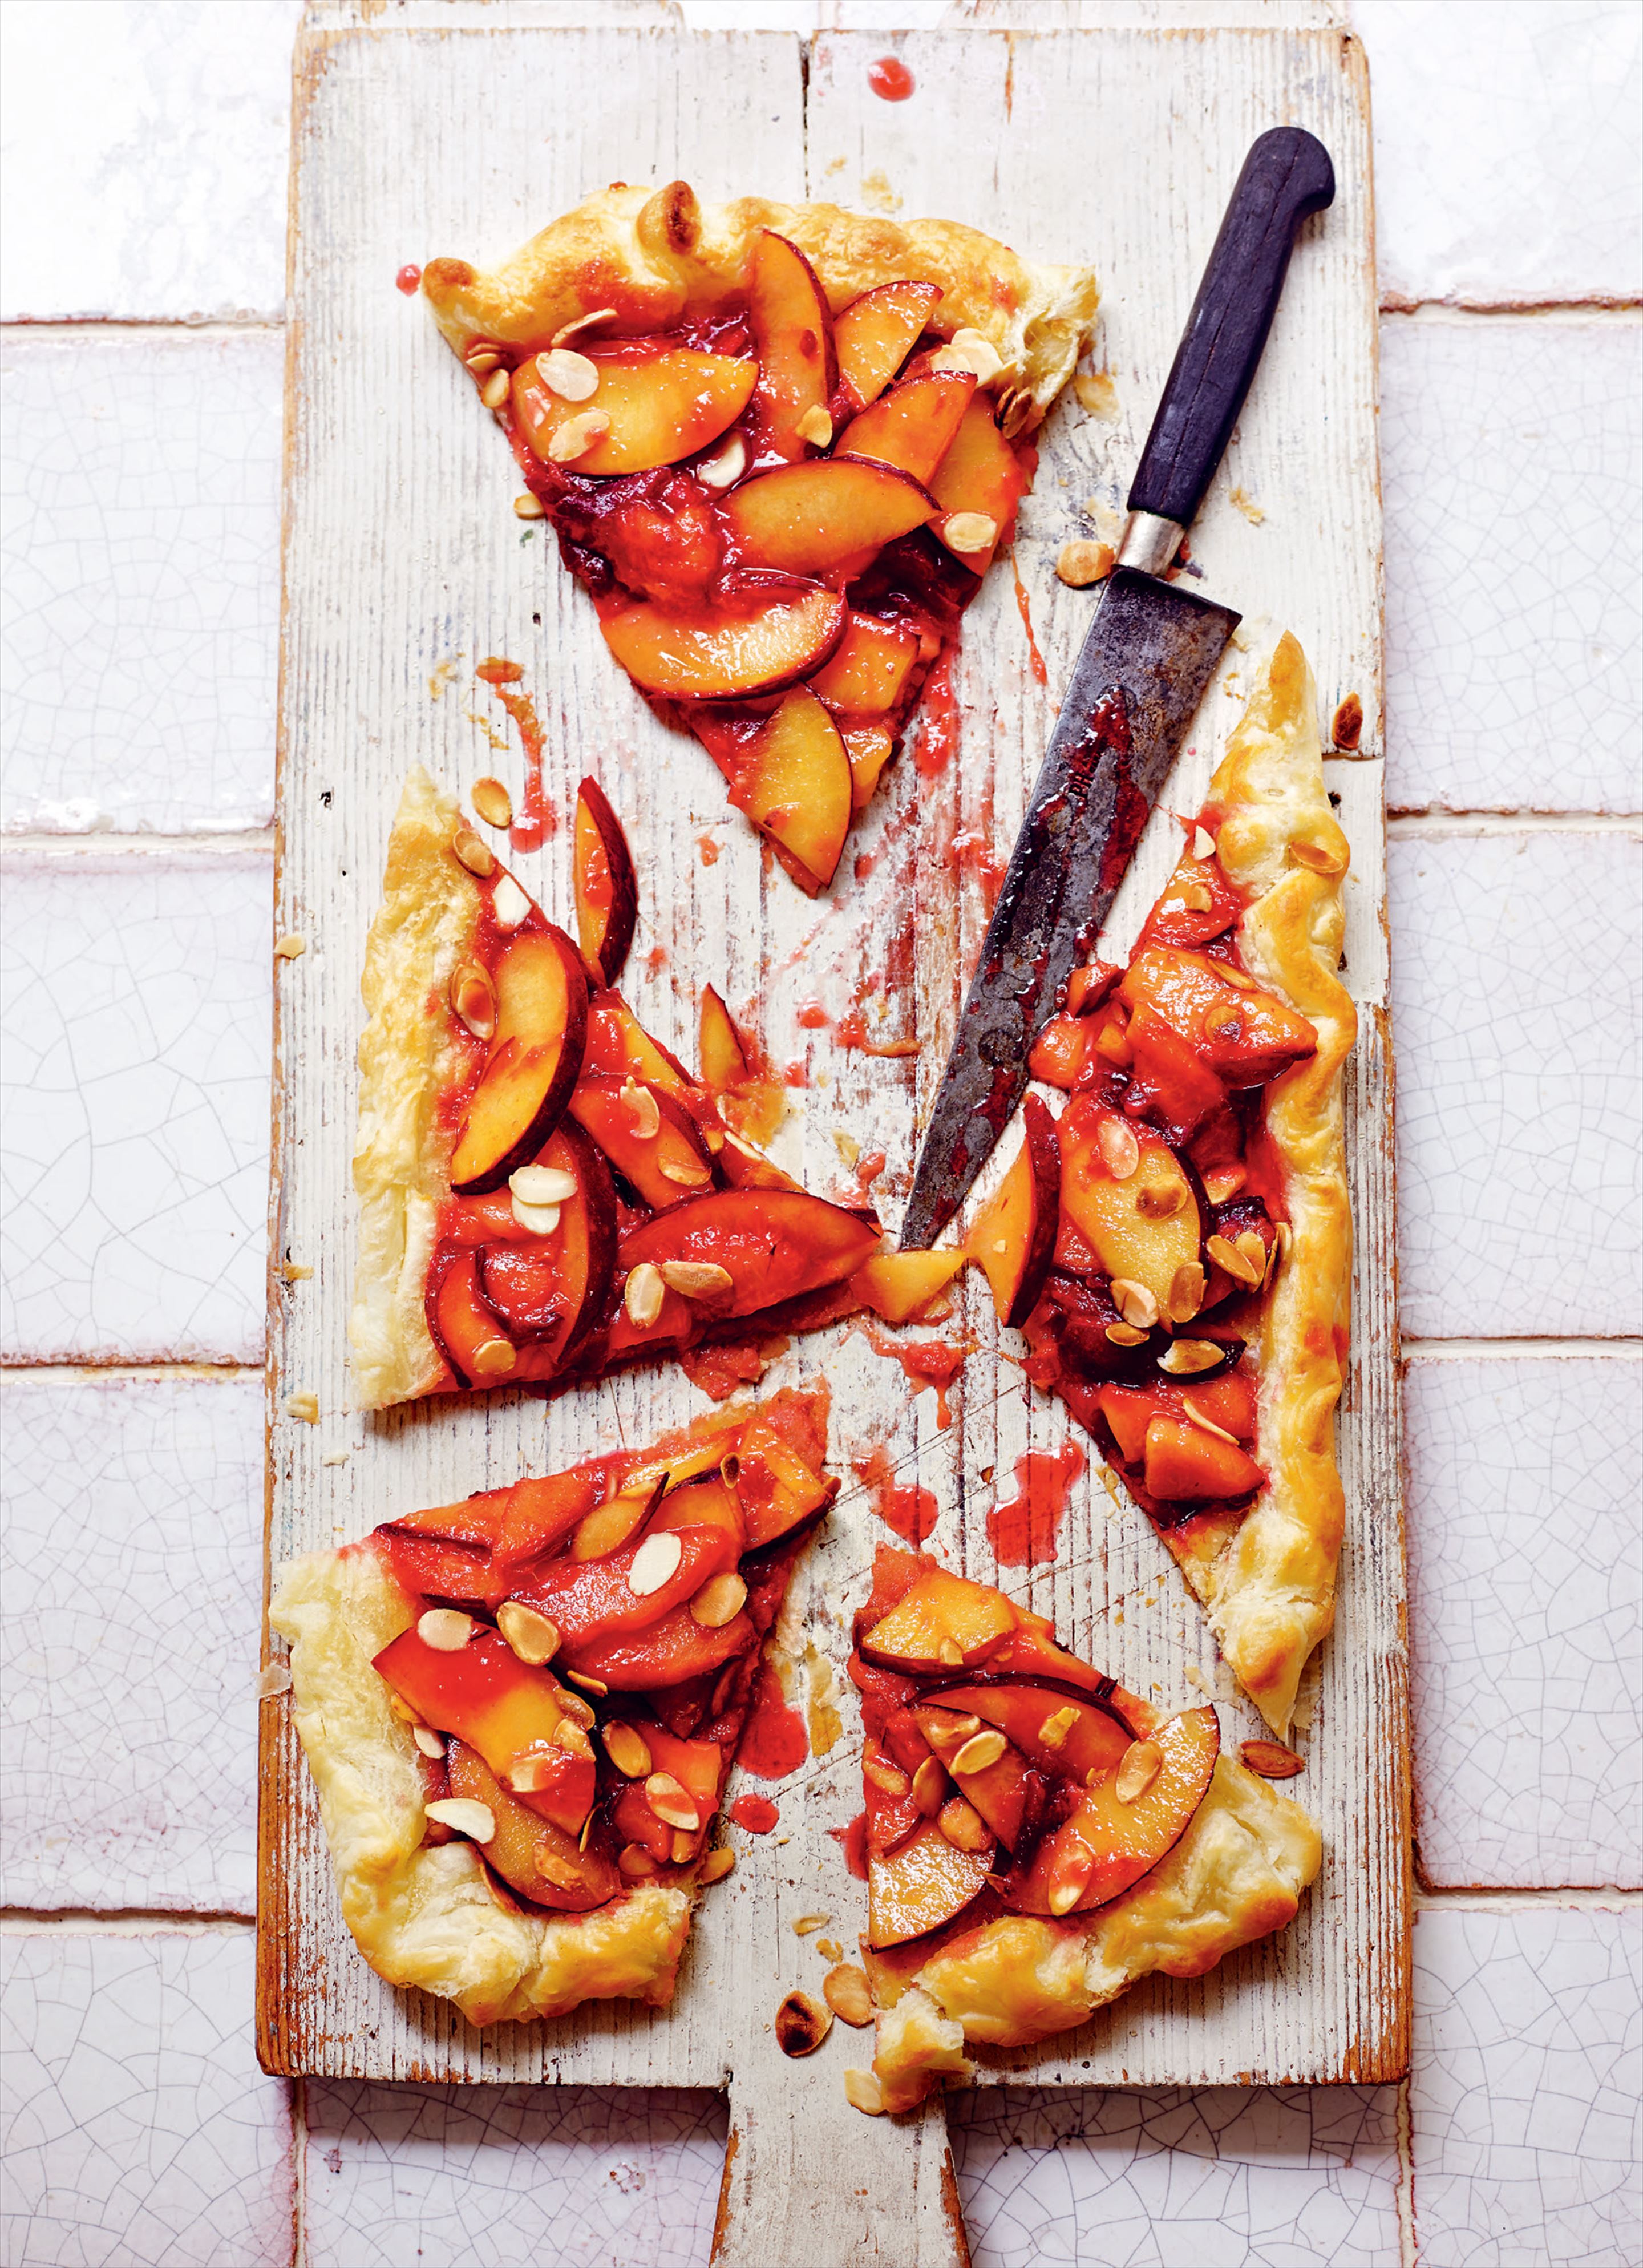 Plum and almond galette